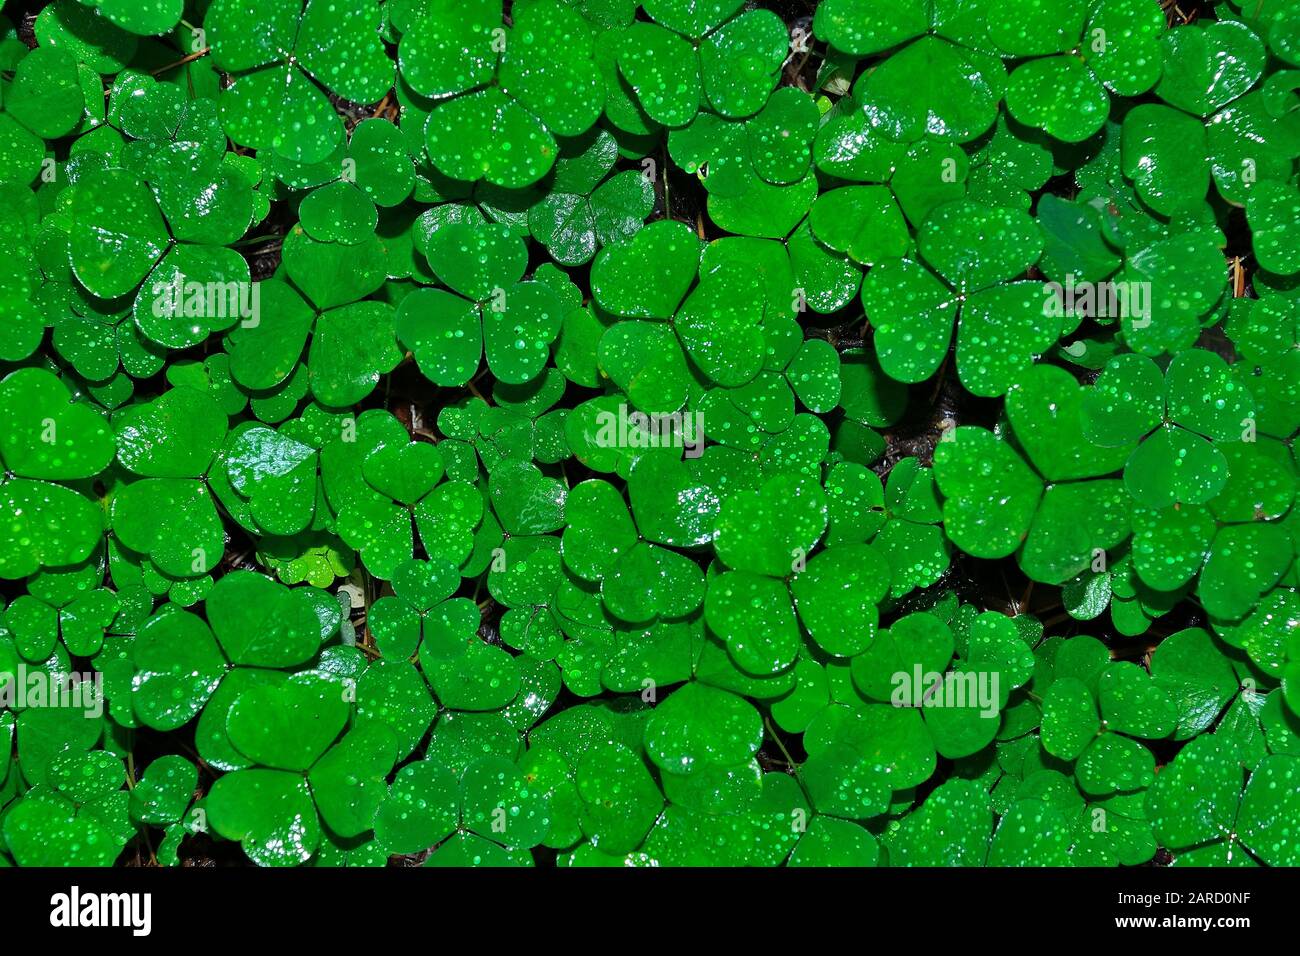 Wet leaves of clover with water drops after rain - natural summer or spring background. Bright green foliage of clover with shiny raindrops. Morning d Stock Photo